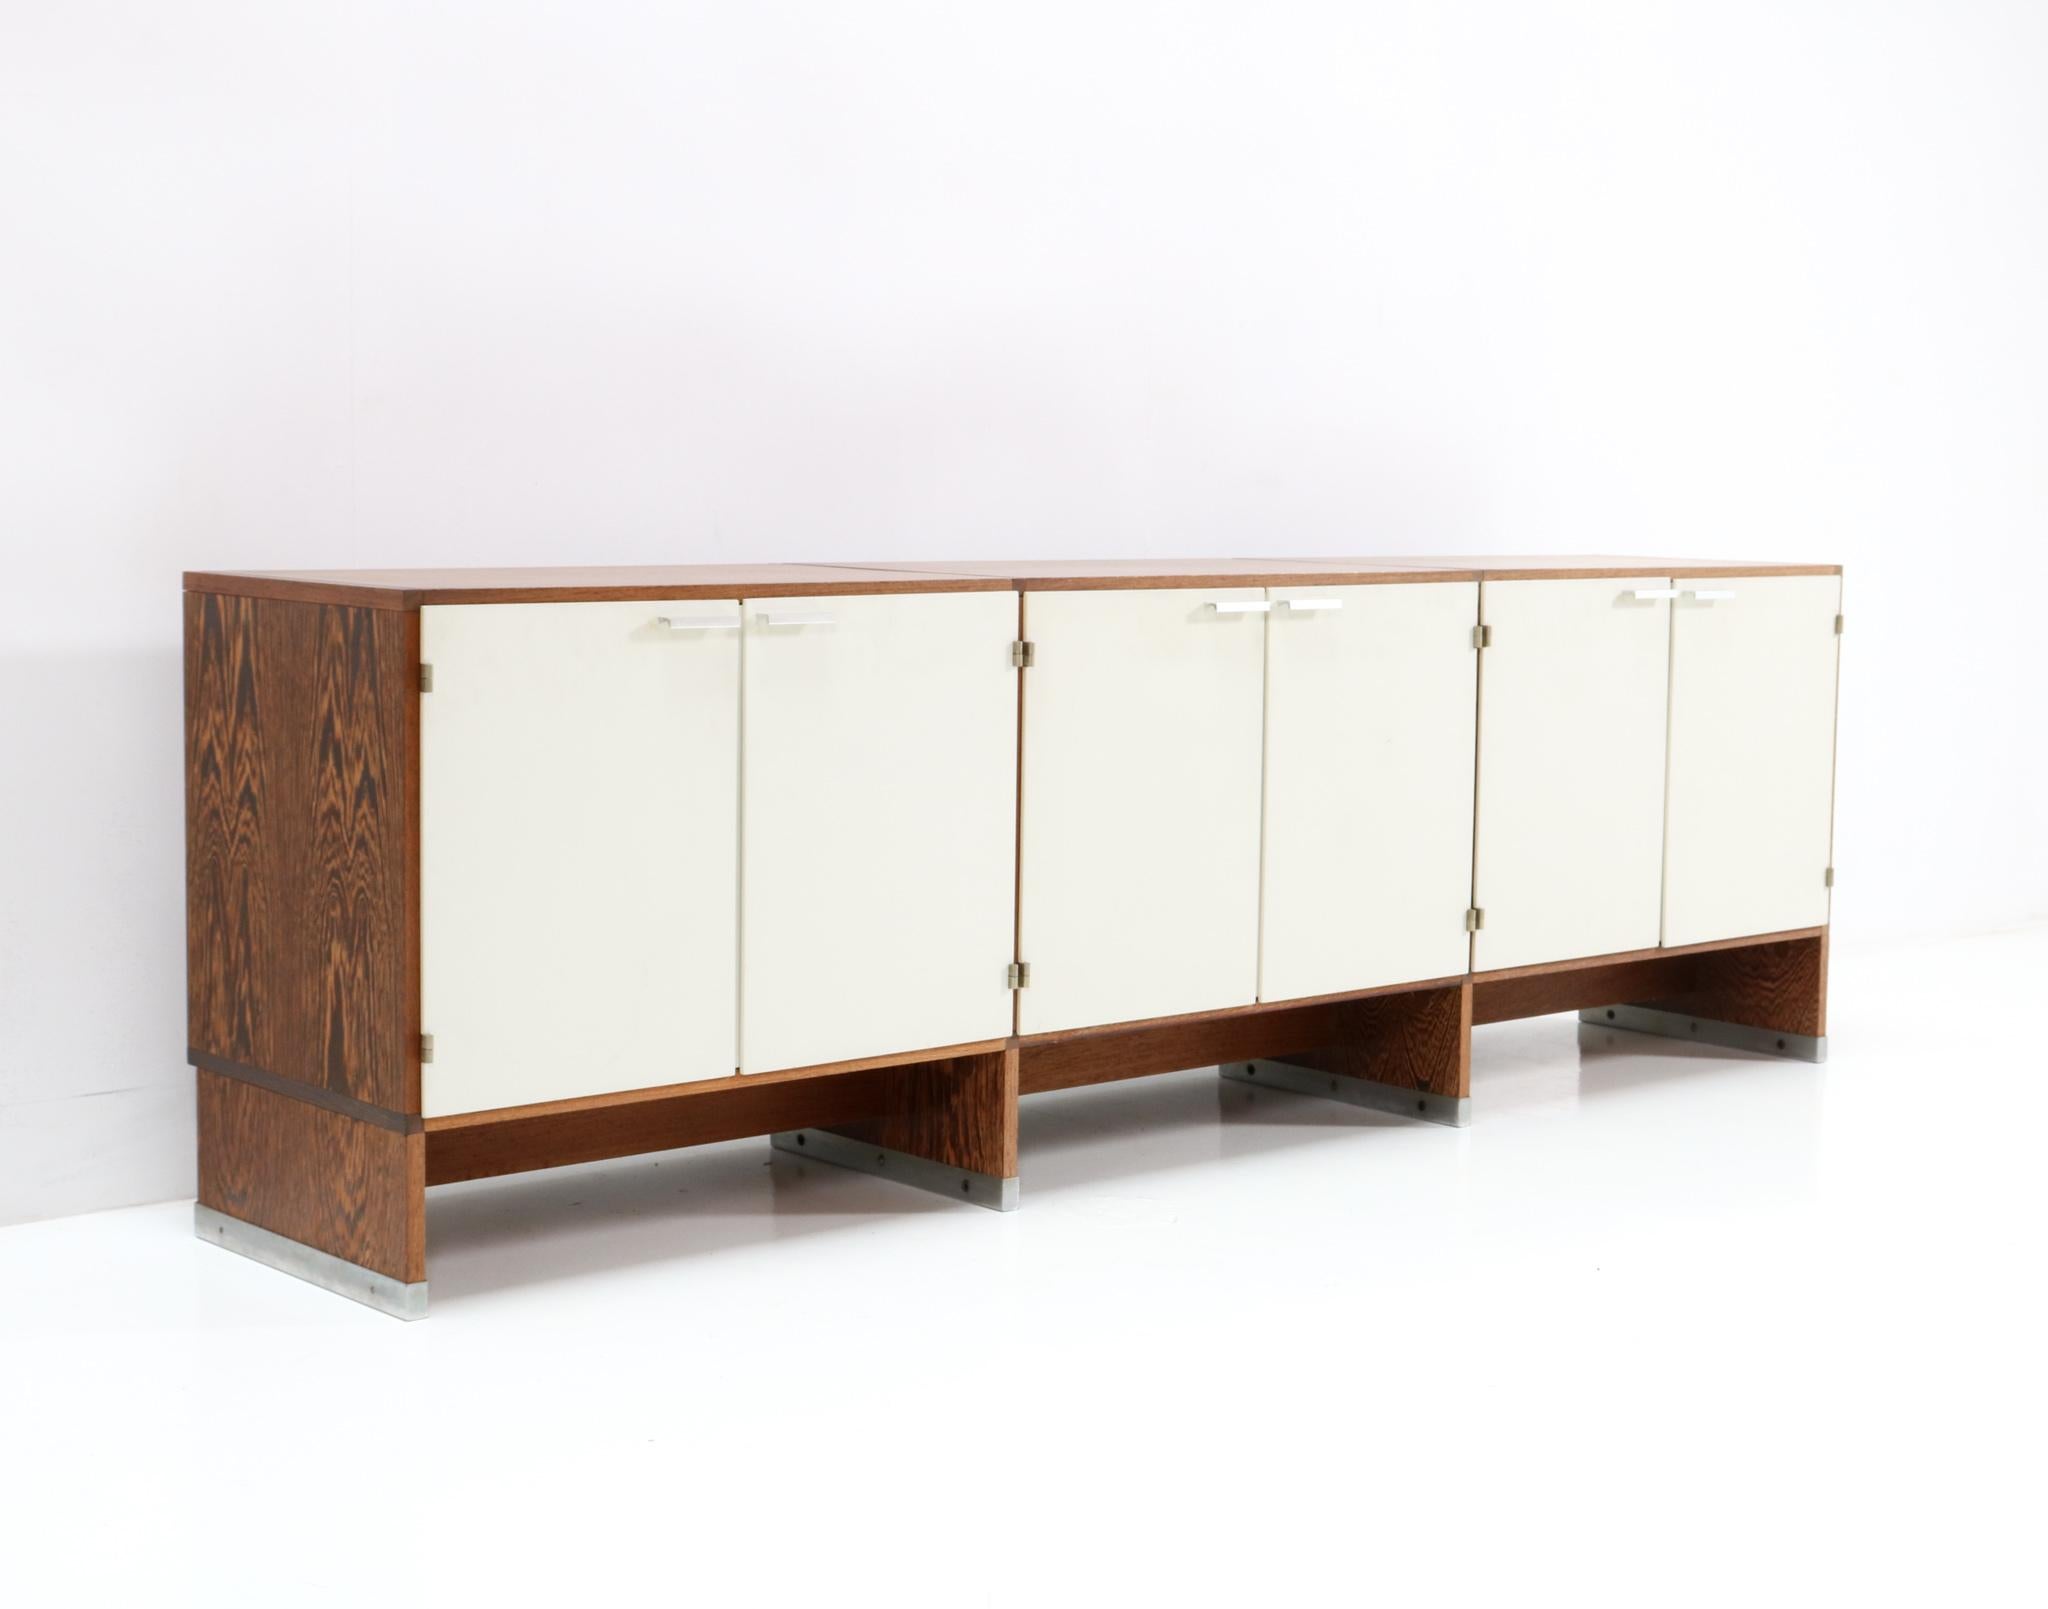 Magnificent and rare Mid-Century Modern credenza or sideboard.
Design by Cees Braakman for Pastoe.
Striking Dutch design from the 1960s.
Original wenge veneered pressed wood base with original white laminated doors.
Marked Pastoe inside.
This